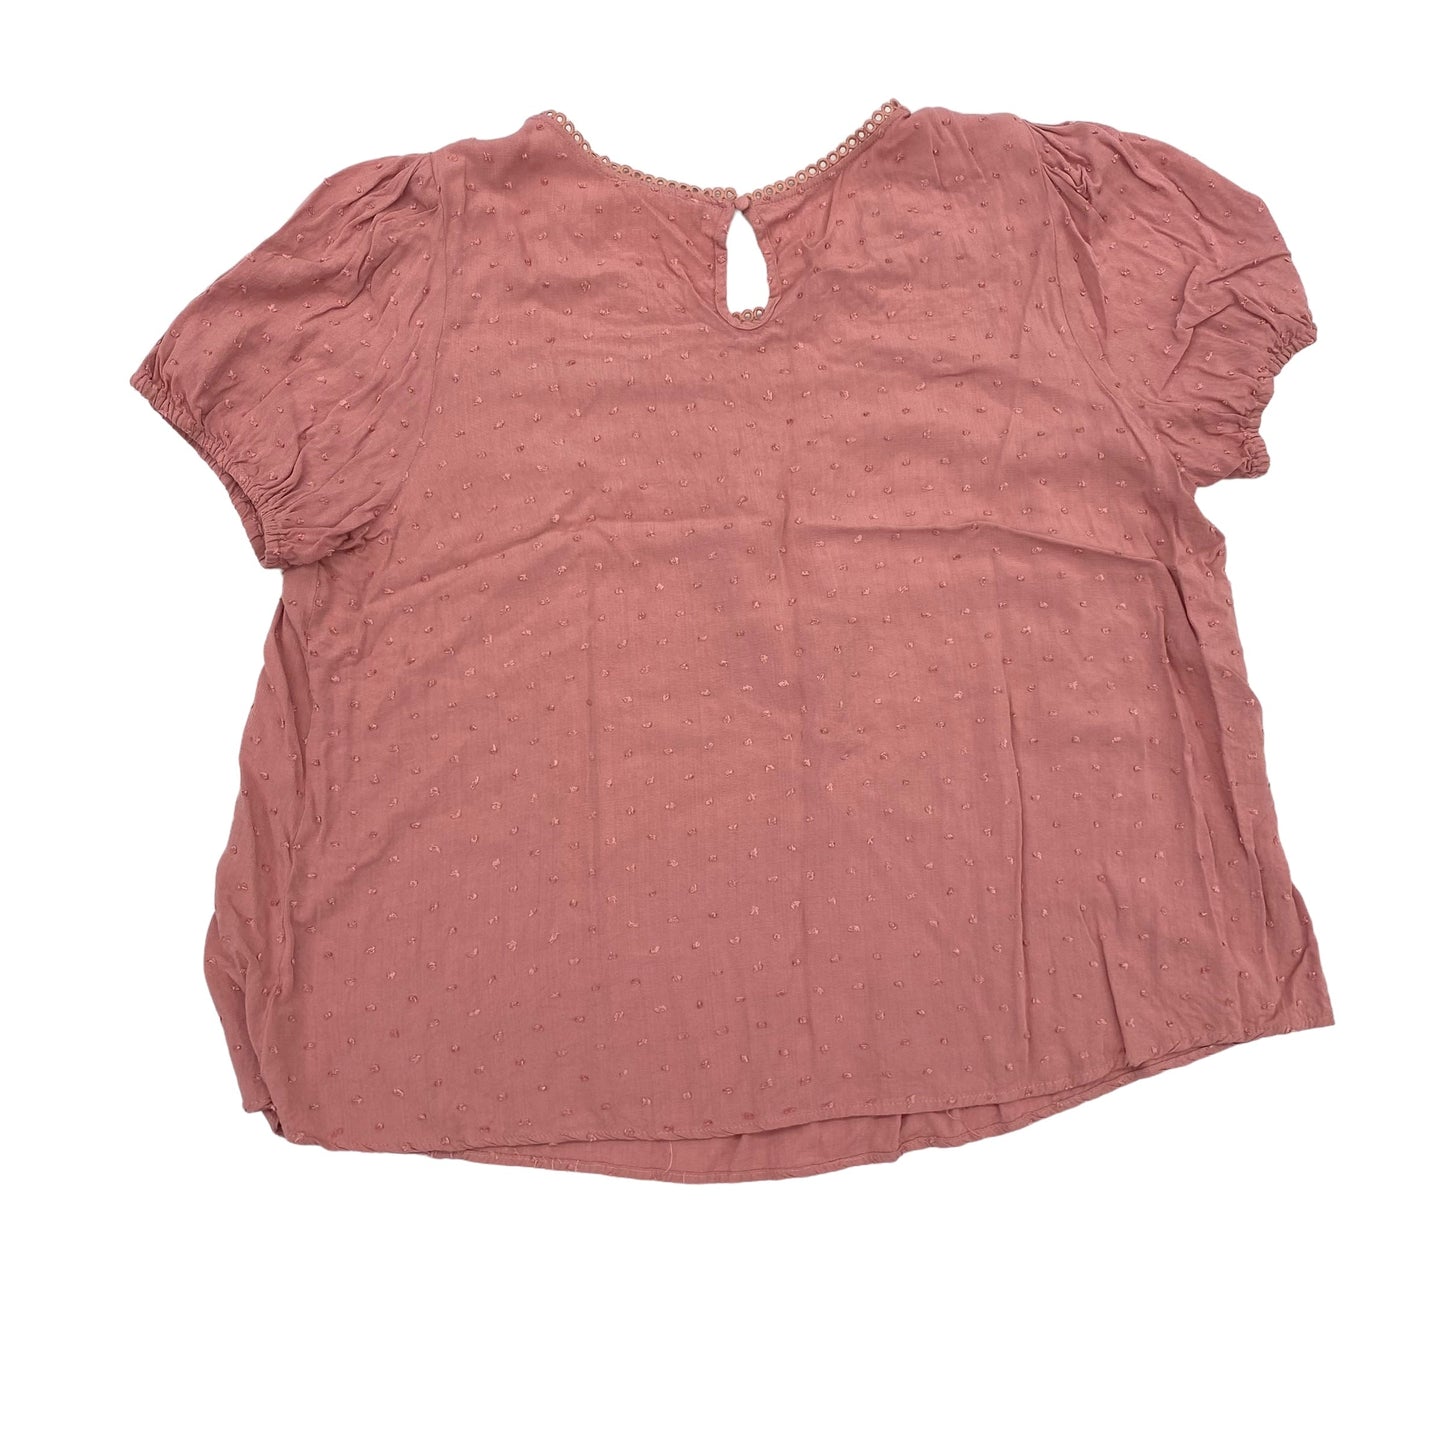 PINK    CLOTHES MENTOR TOP SS, Size 3X